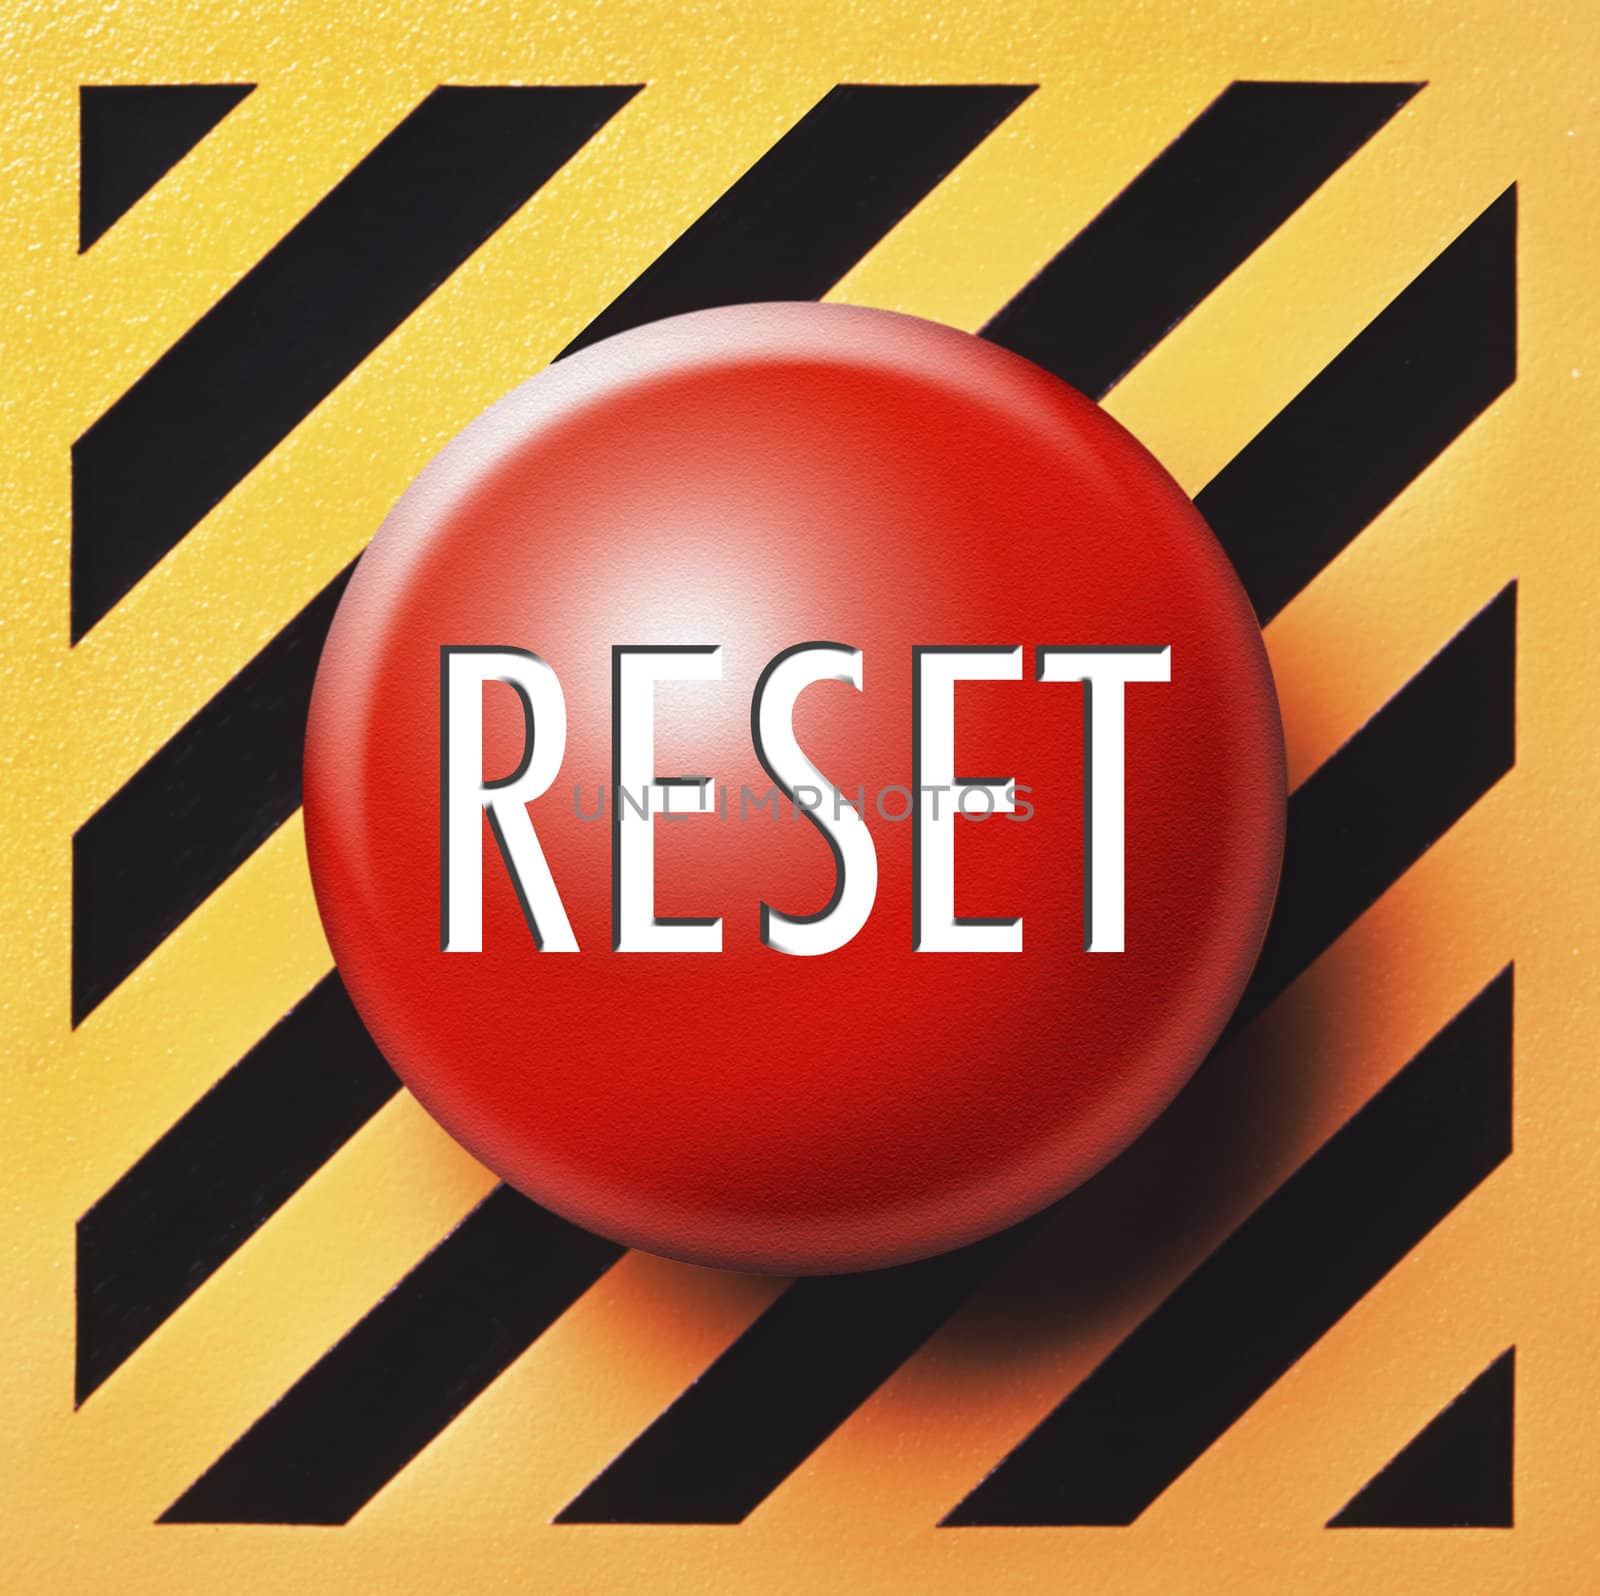 Reset button by f/2sumicron